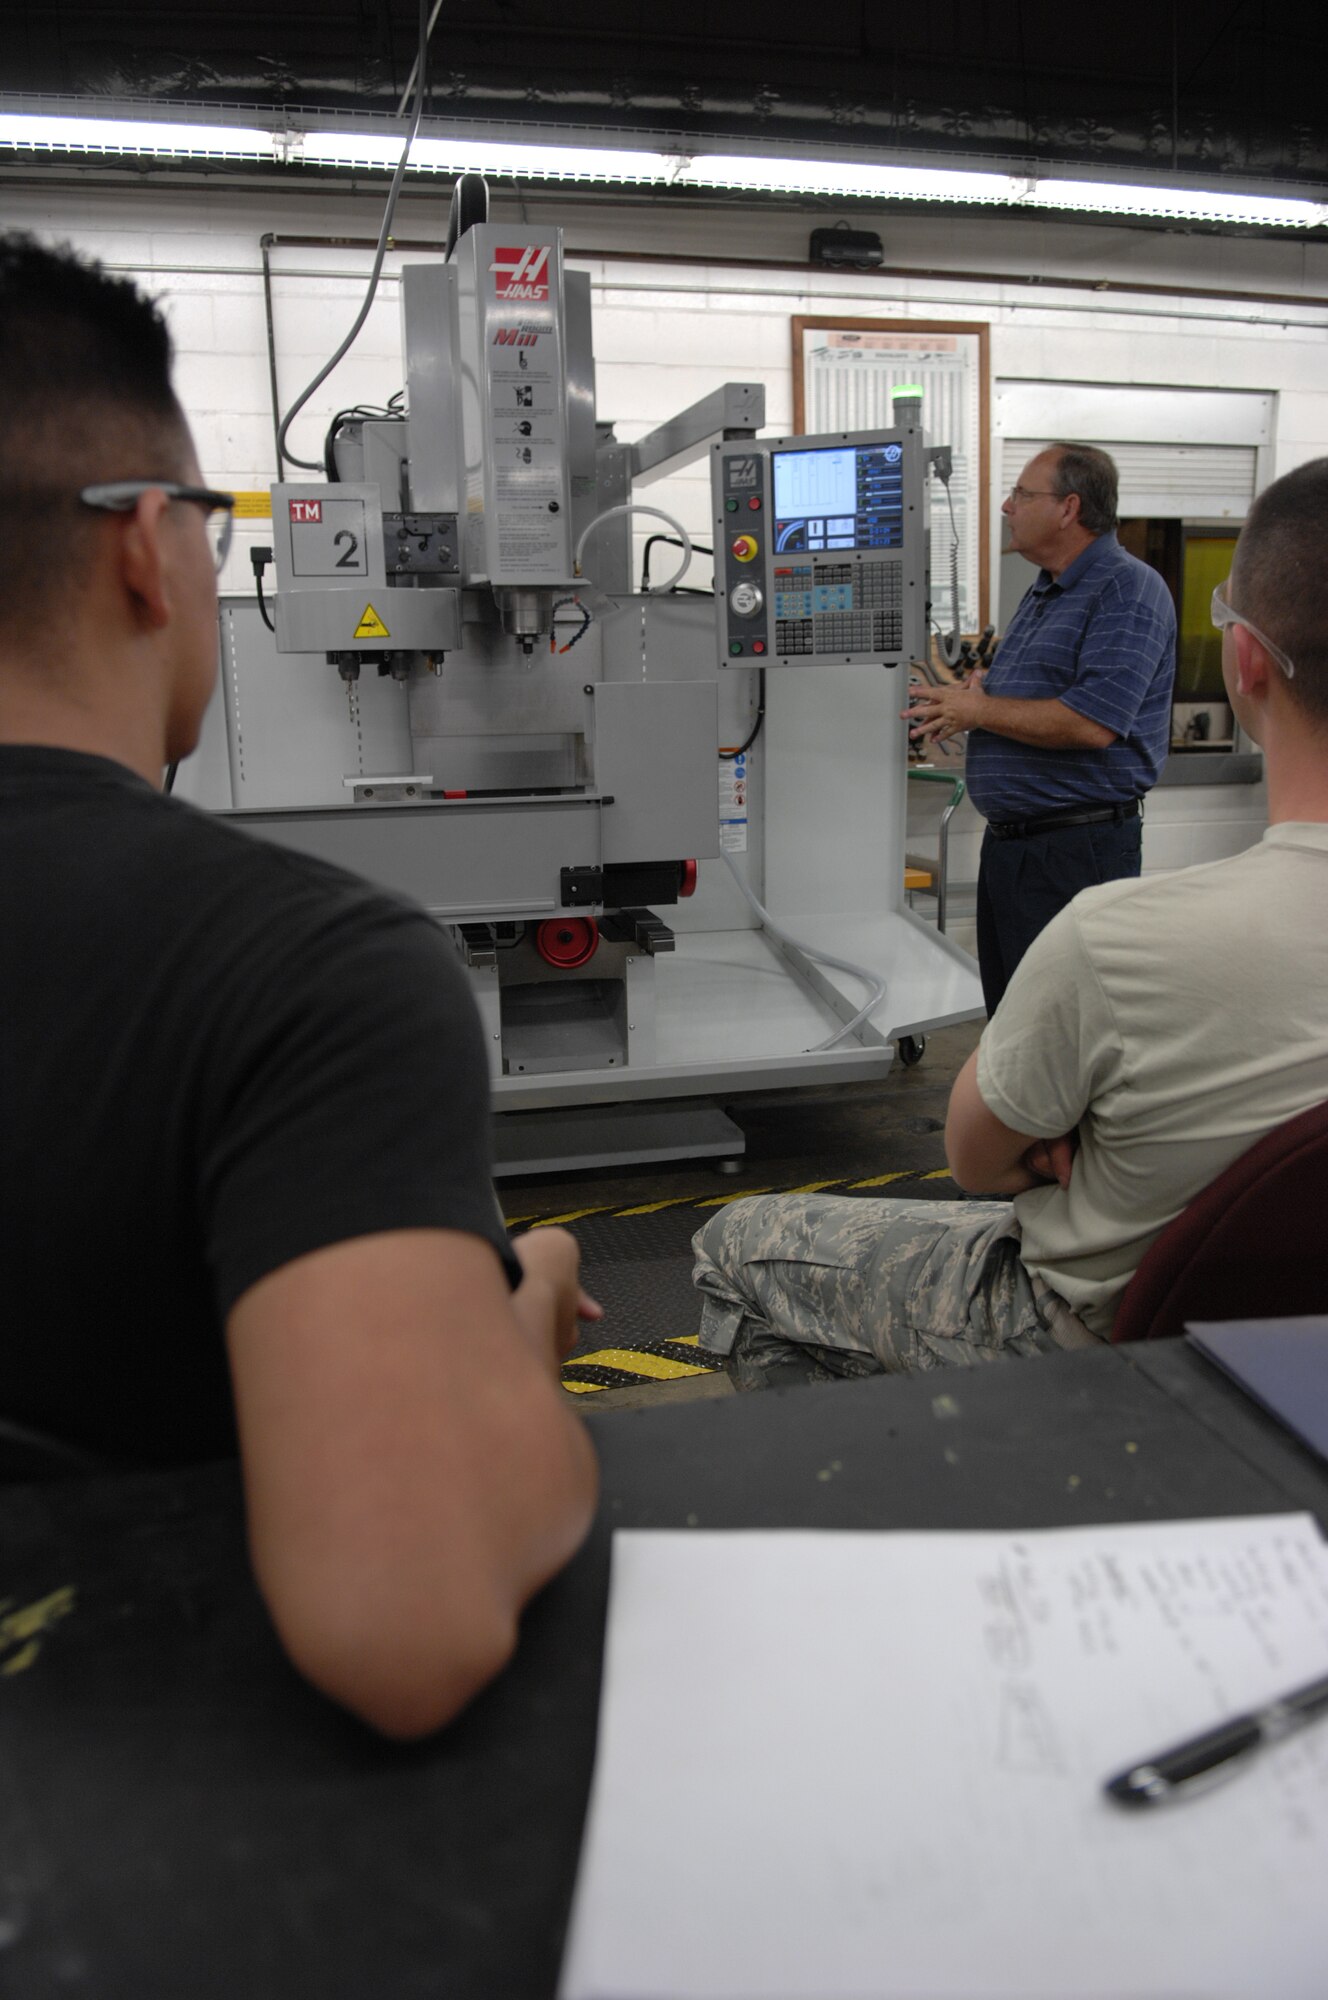 MOODY AIR FORCE BASE, Ga. -- Jeff Foster (right front), Philips Corporation computer numerical control applications and education division, instructs five 23rd Equipment Maintenance Squadron Aircraft Metals Technology airmen on how to use and write programs for a new mill machine here August 26. This new mill will replace outdated existing equipment and improve fabrication time and safety. (U.S. Air Force photo by Senior Airman Javier Cruz)